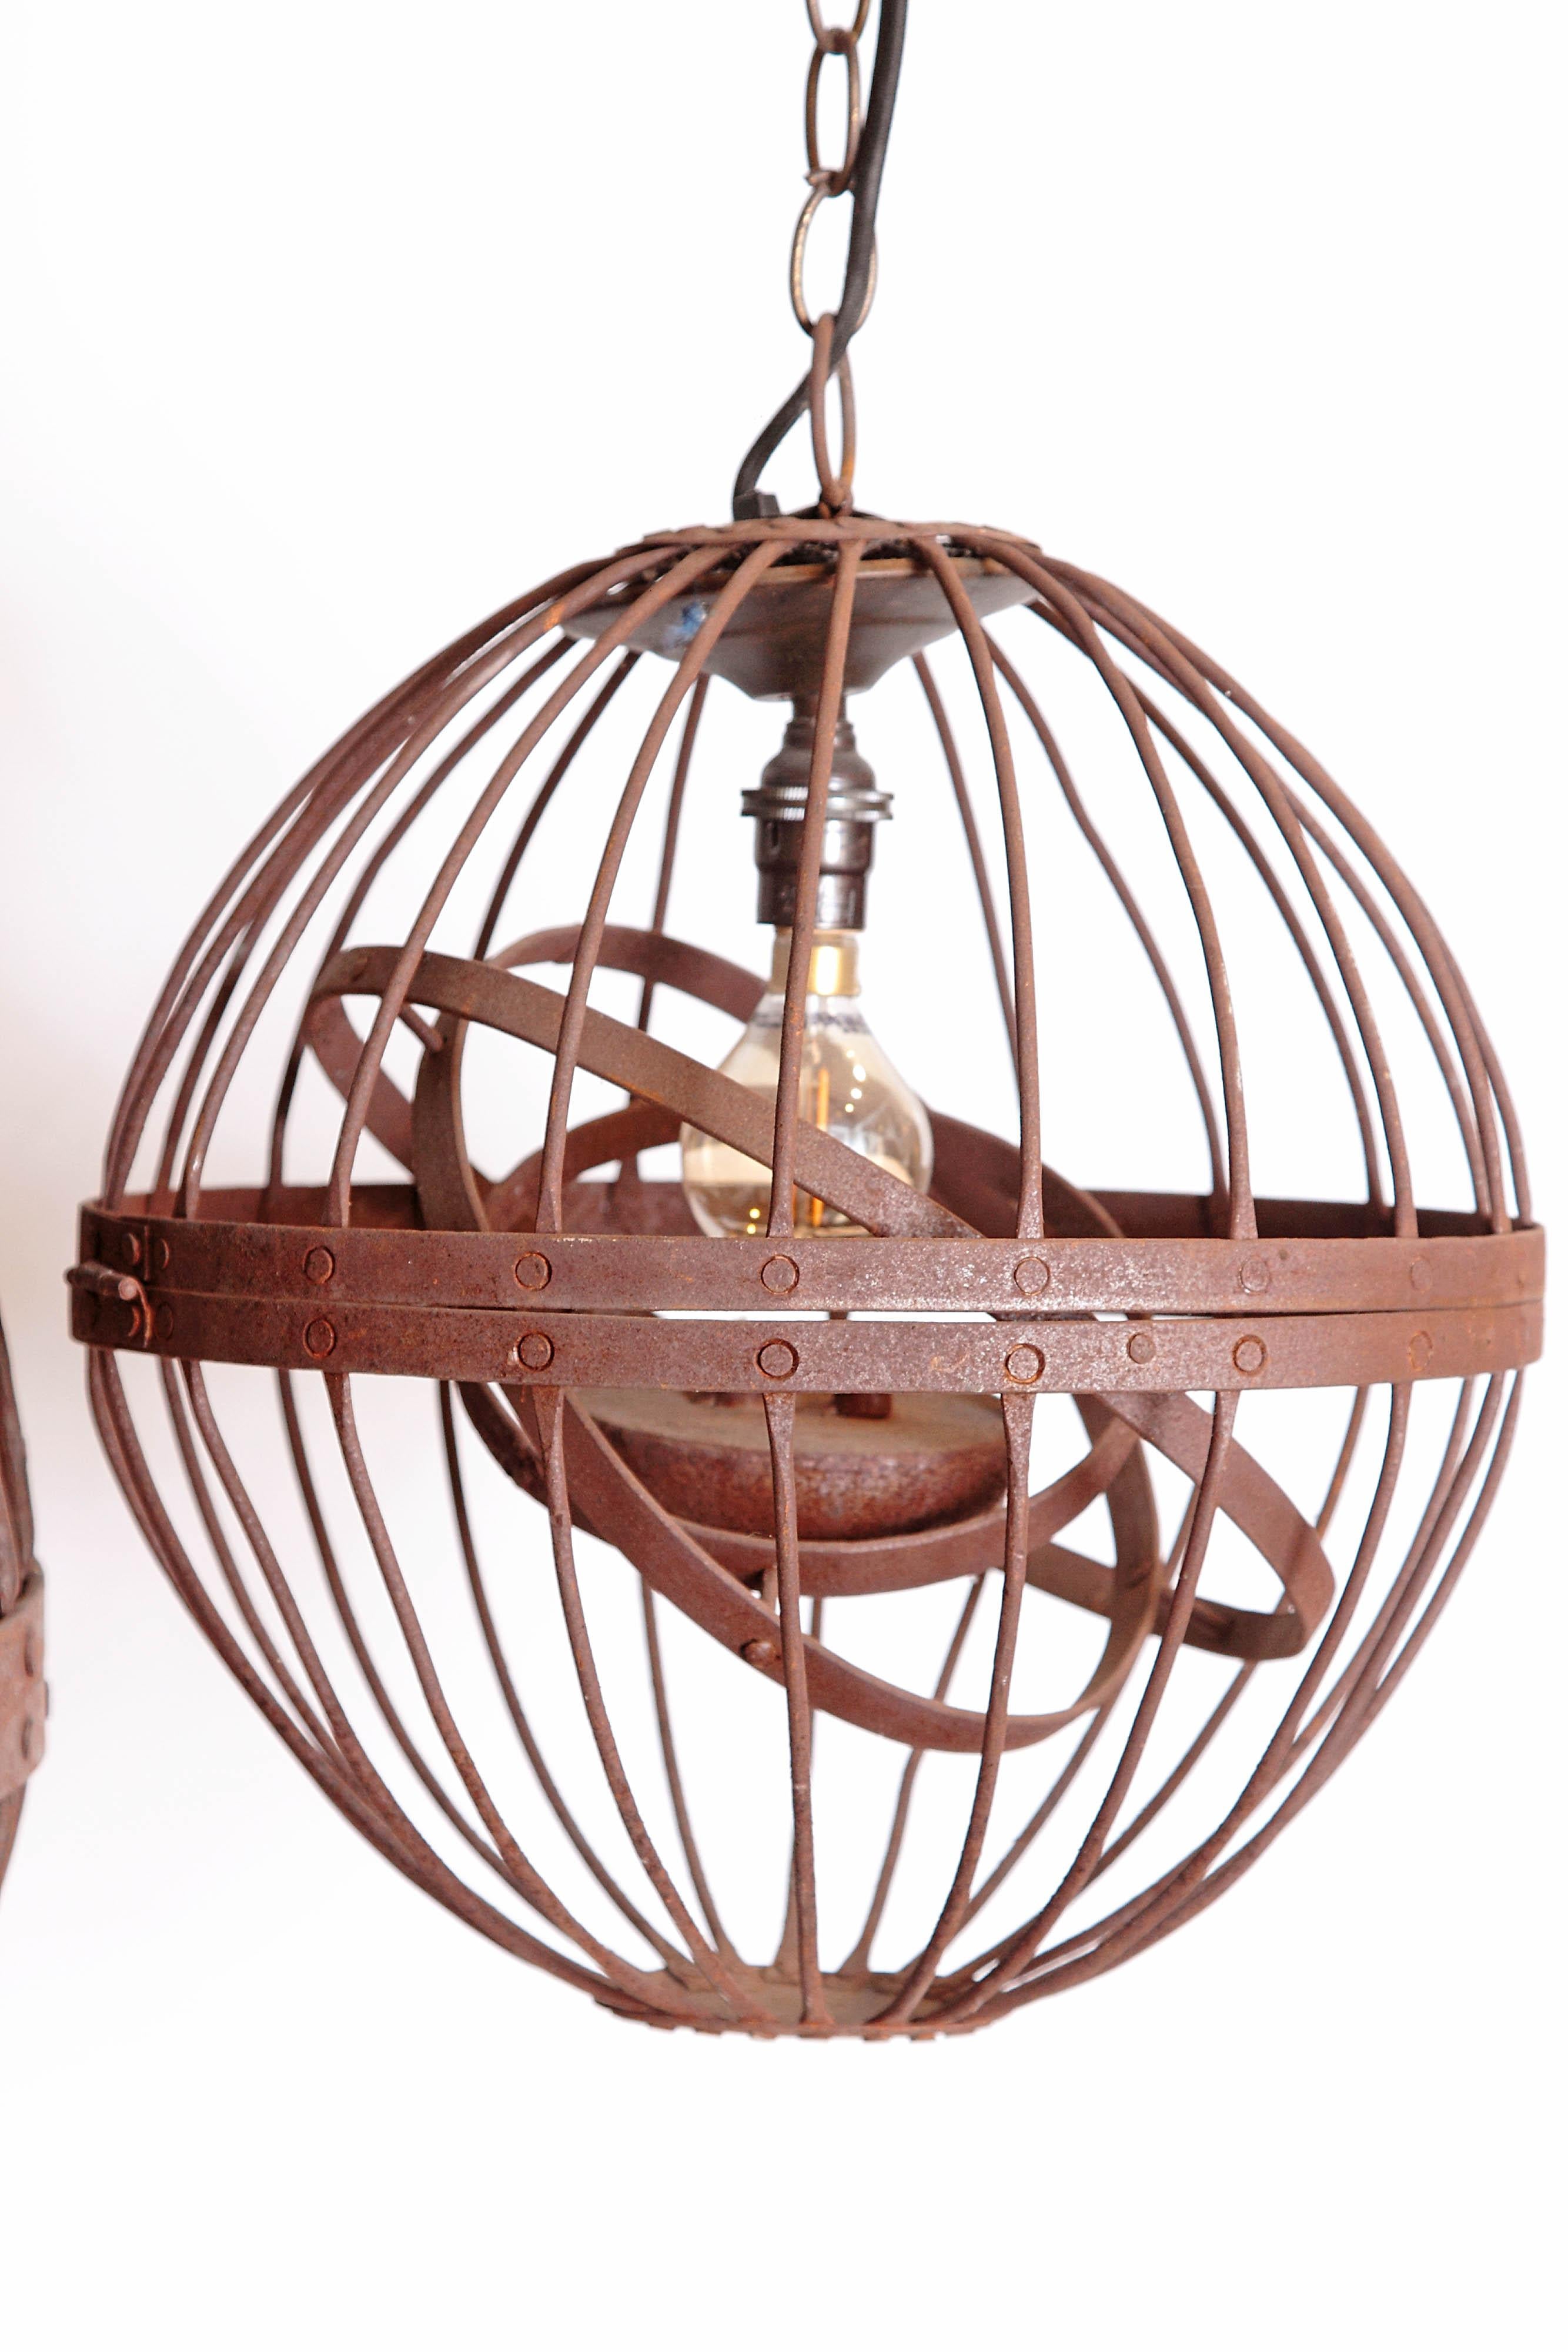 Three 19th century, now electrified, gyroscopic whale-oil lamps constructed of iron ribs with a triple gimbal to steady the burning flame in the heaviest seas or winds. Two of the lamps measure 12